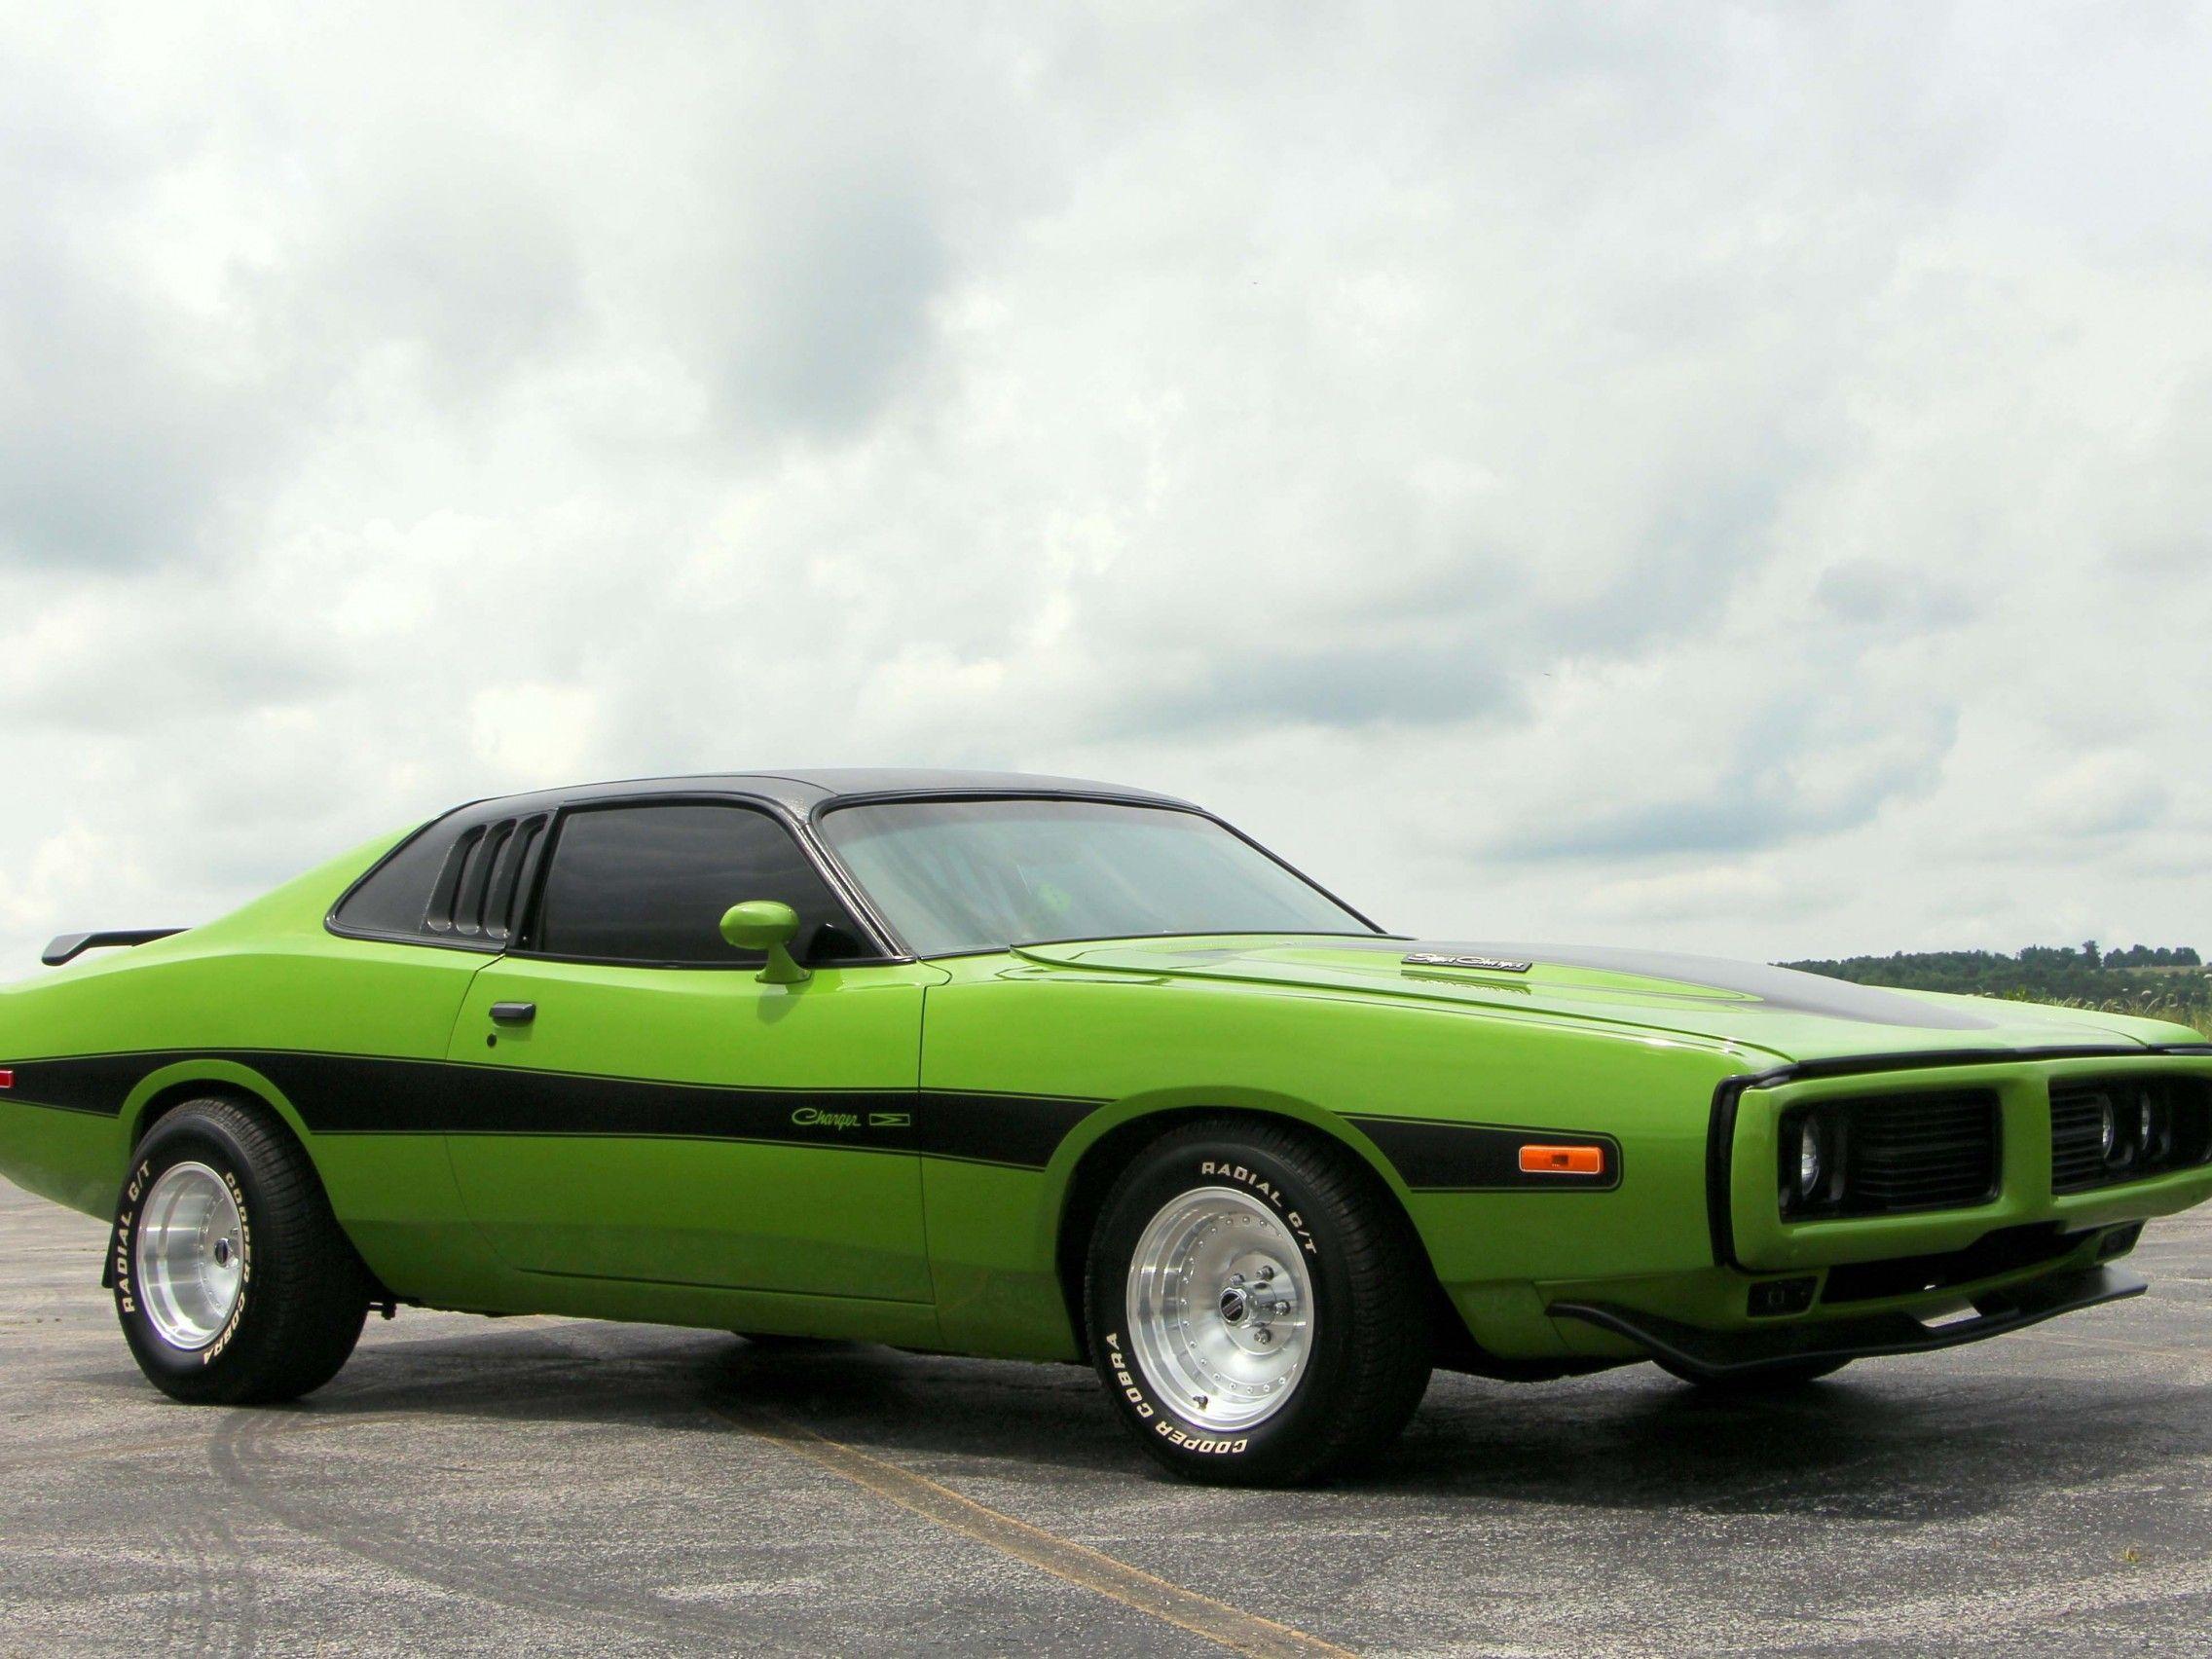 Download 2272x1704 Dodge Charger Green, Side View, Cars